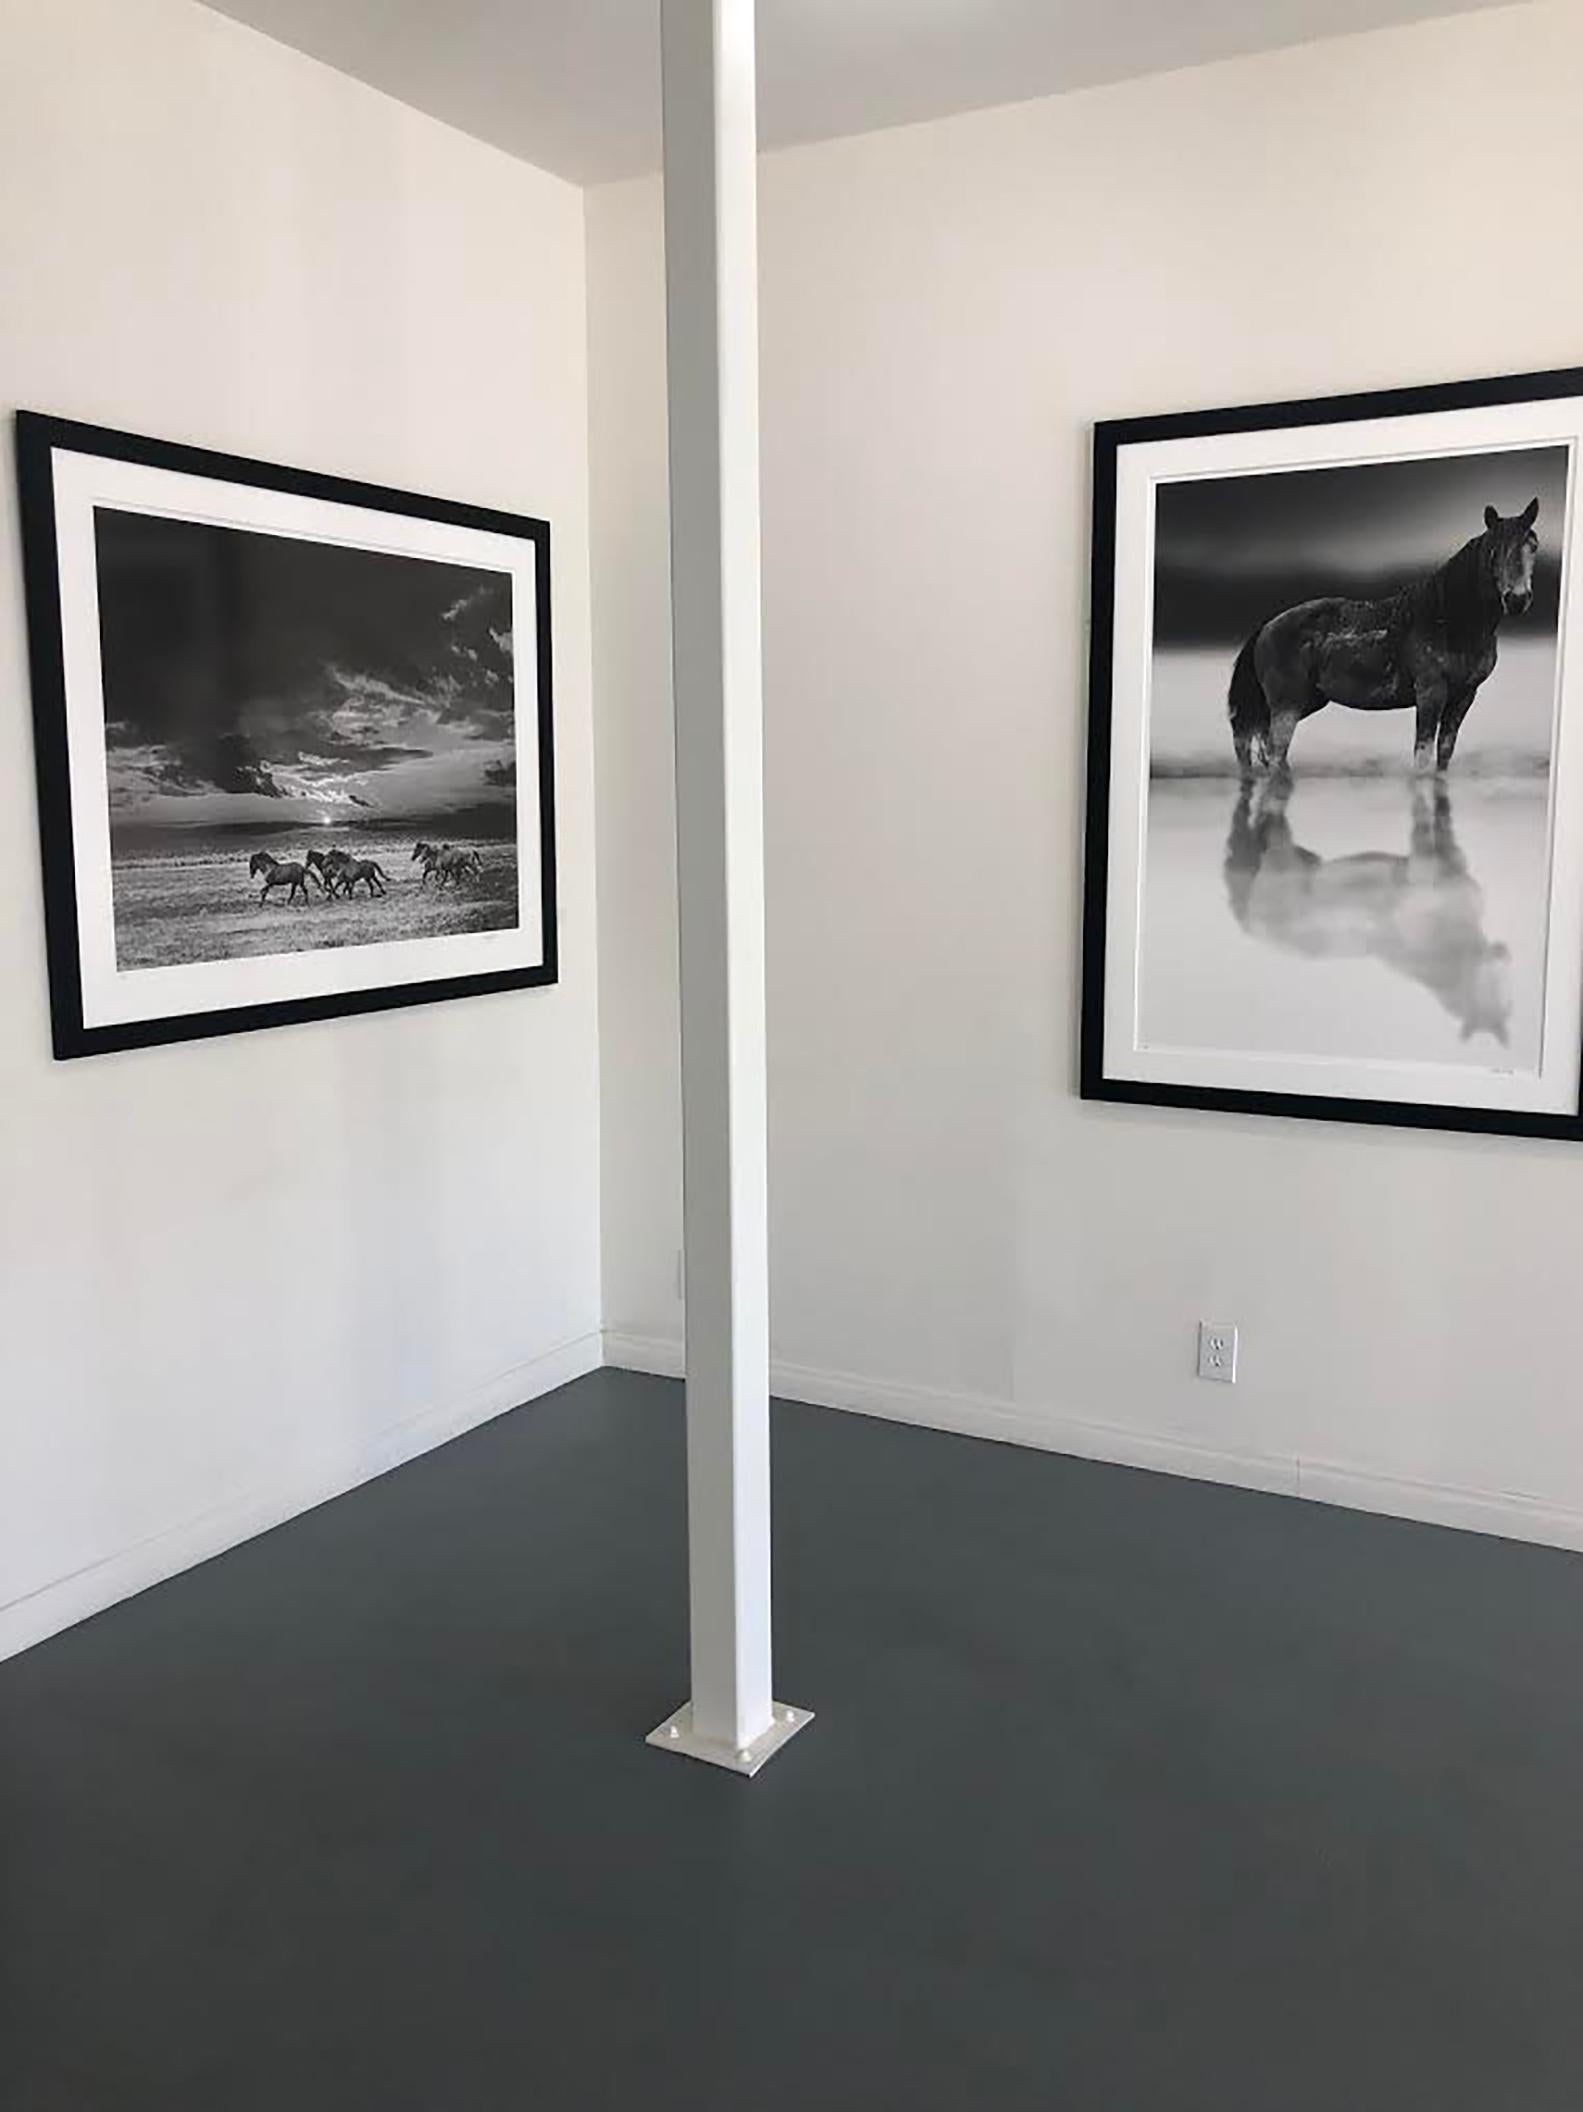 Chasing the Light- 60x40 Black & White Photography Wild Horses Mustangs Unsigned - Gray Black and White Photograph by Shane Russeck